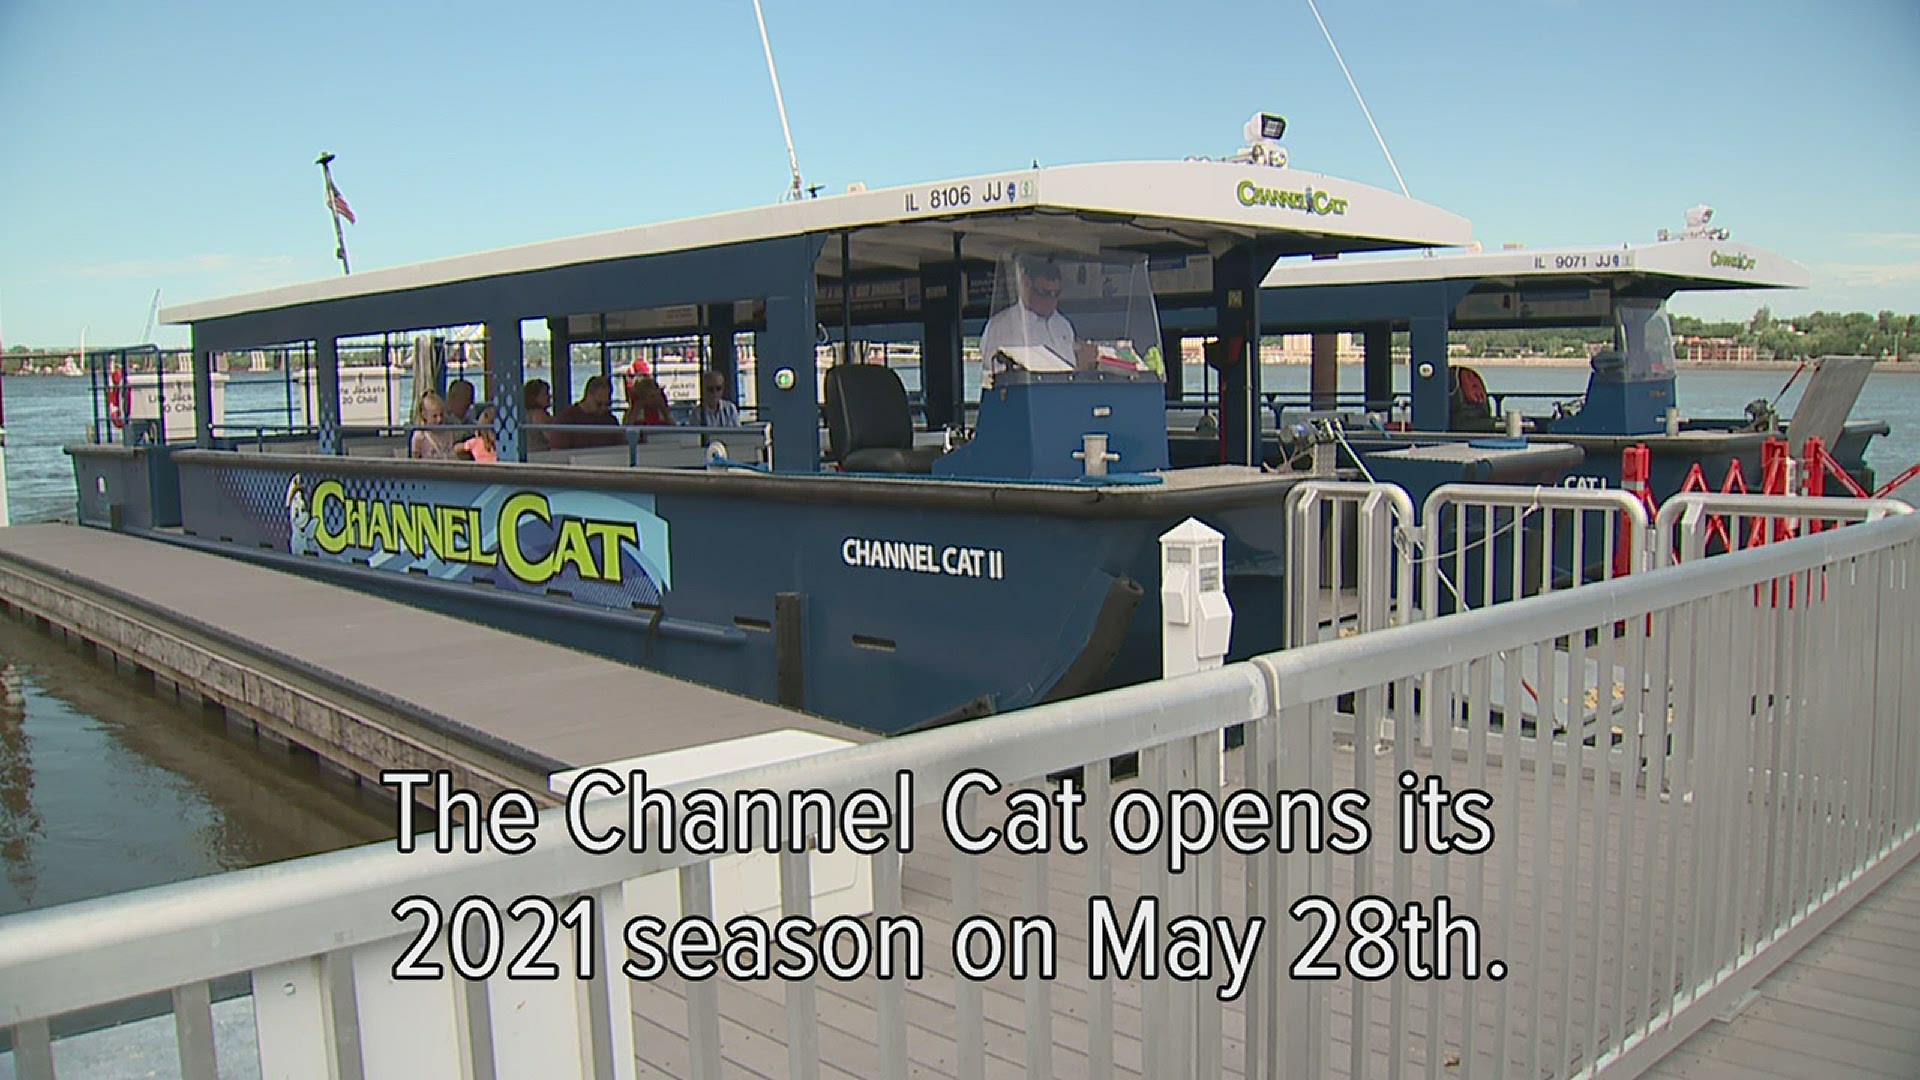 After limited capacity on the boats in 2020, they plan to run at full capacity in 2021. Masks are still required on public transit, until regulations are lifted.